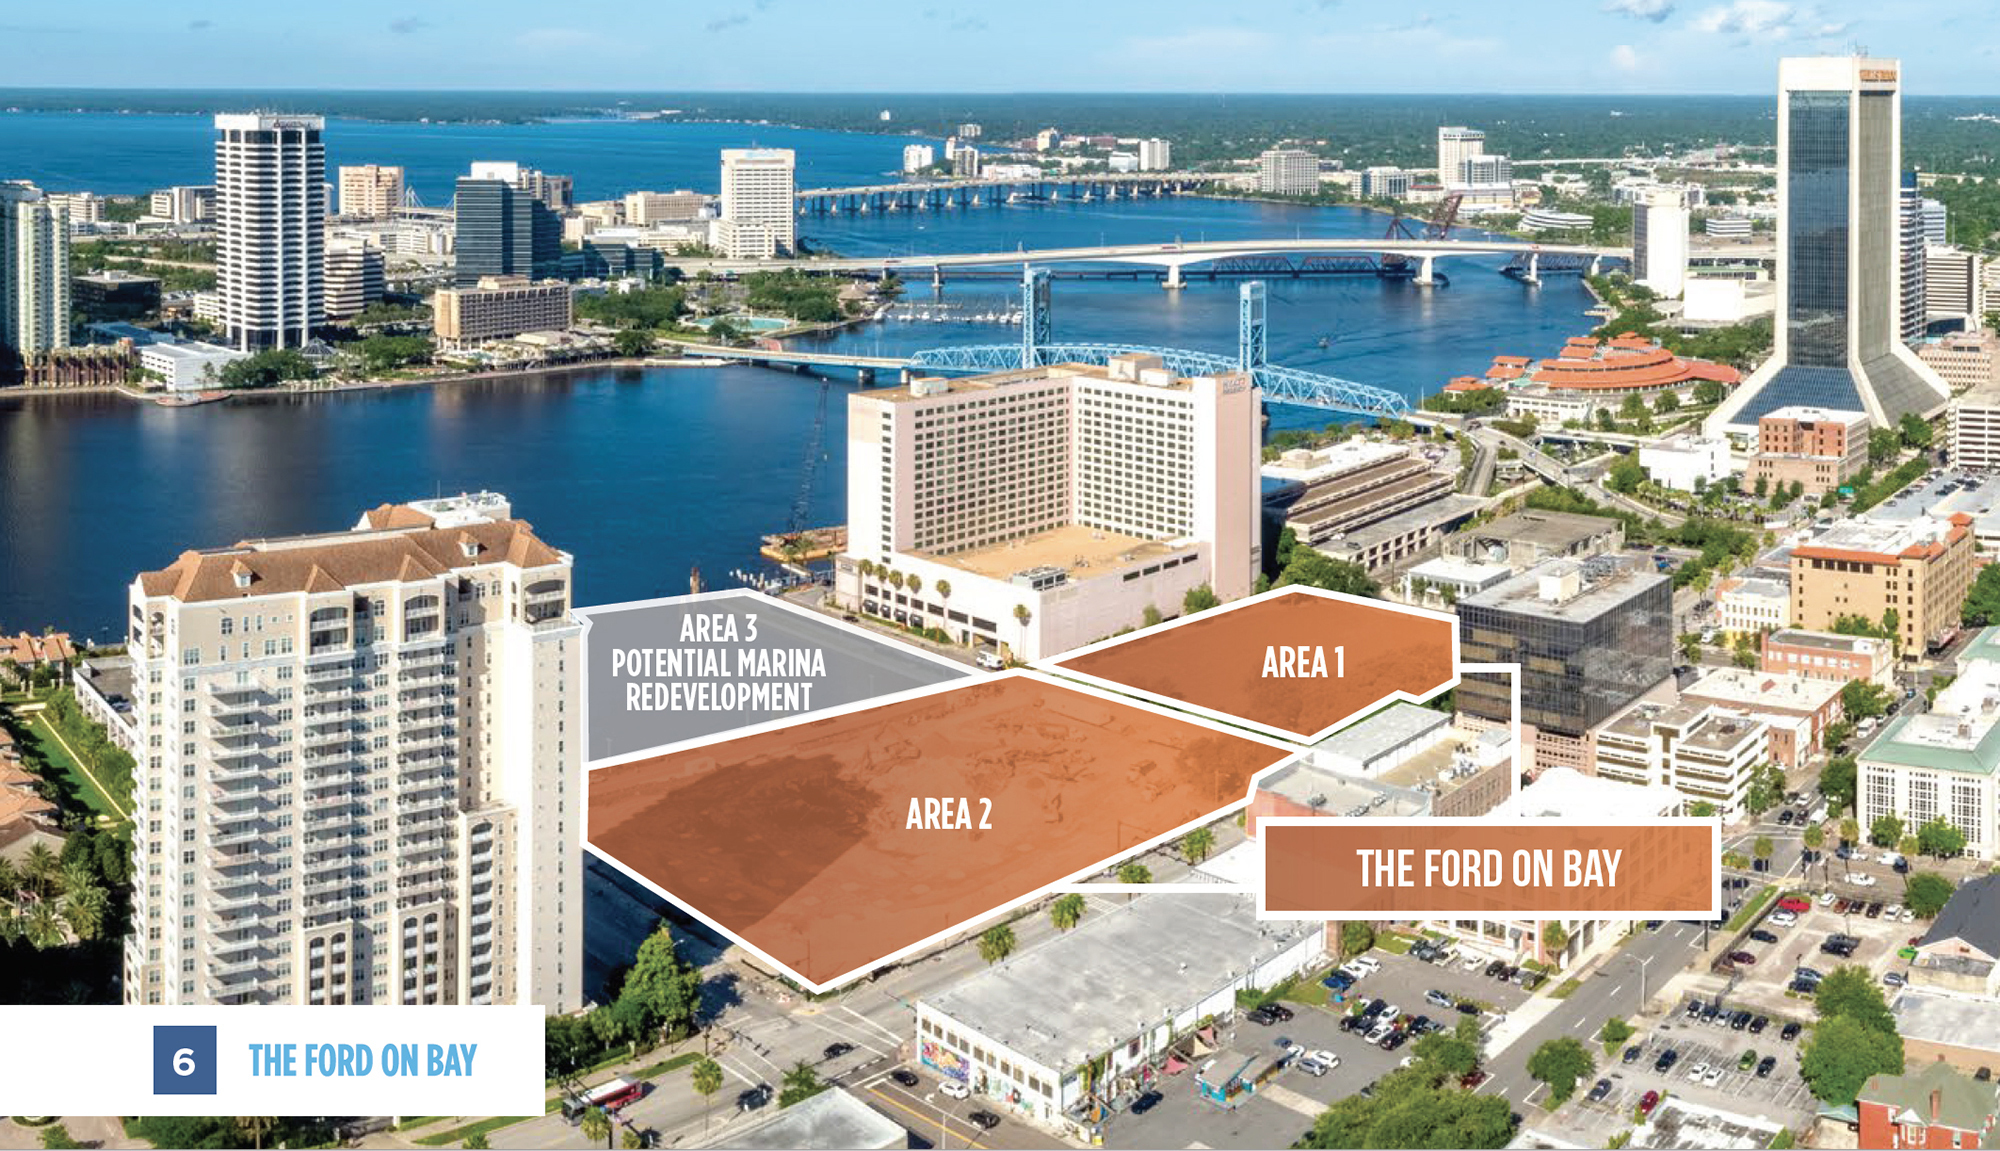 The Ford on Bay site Downtown along the St. Johns River.